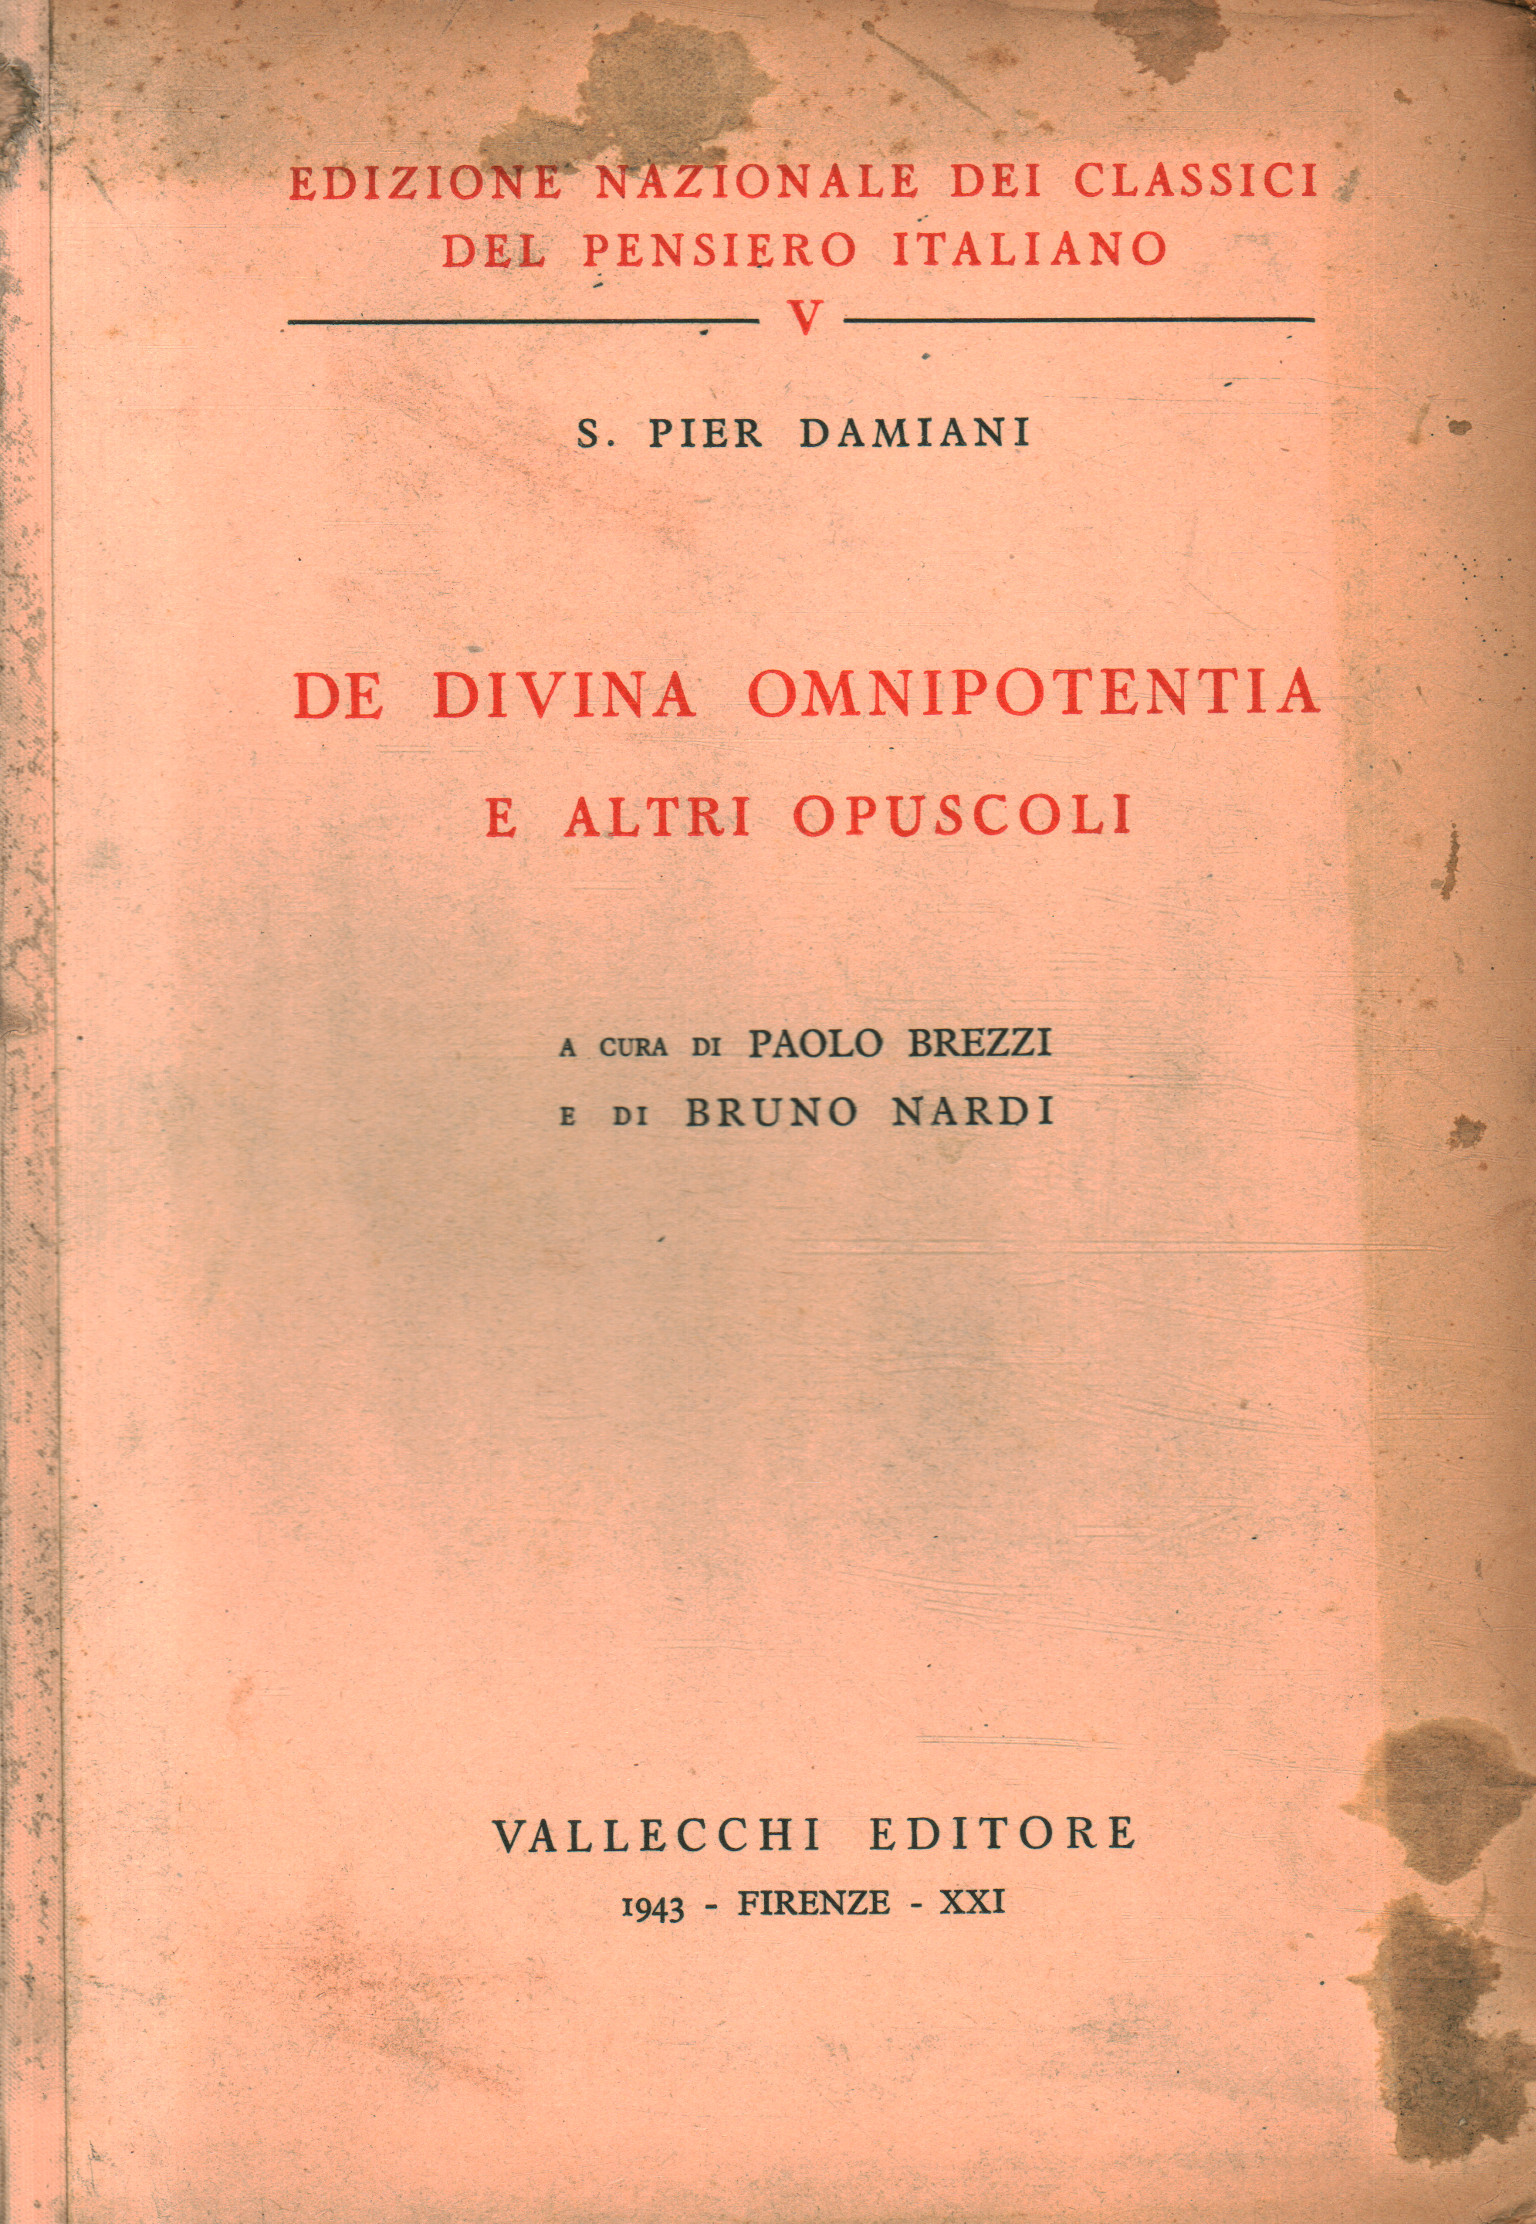 De divina omnipotentia and other booklets